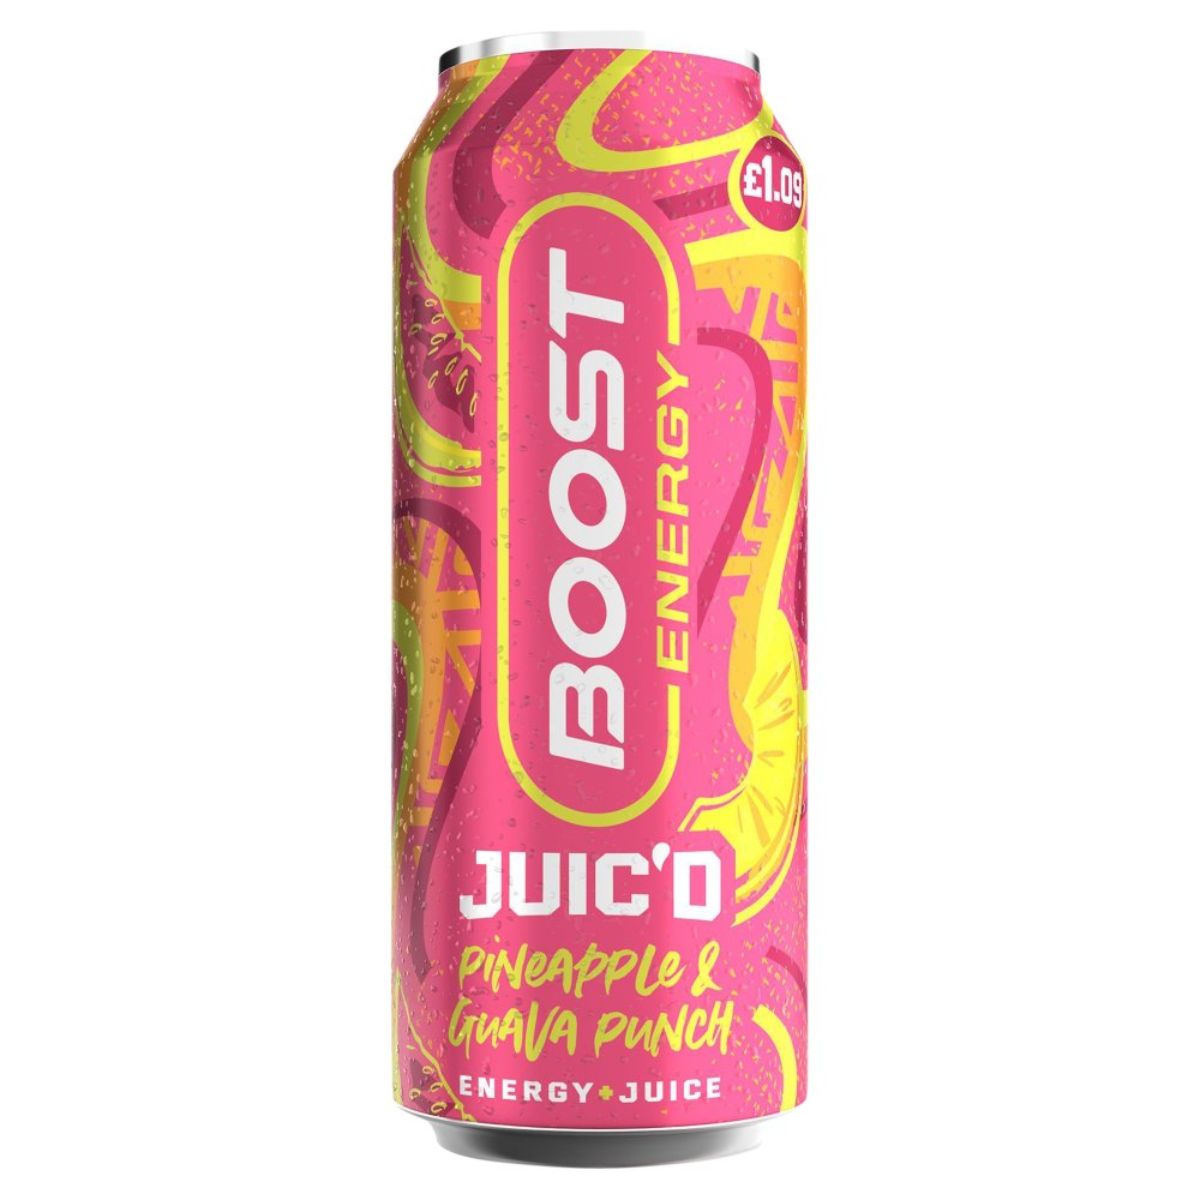 Boost - Energy Juice Pineapple & Guava Punch - 500ml can.